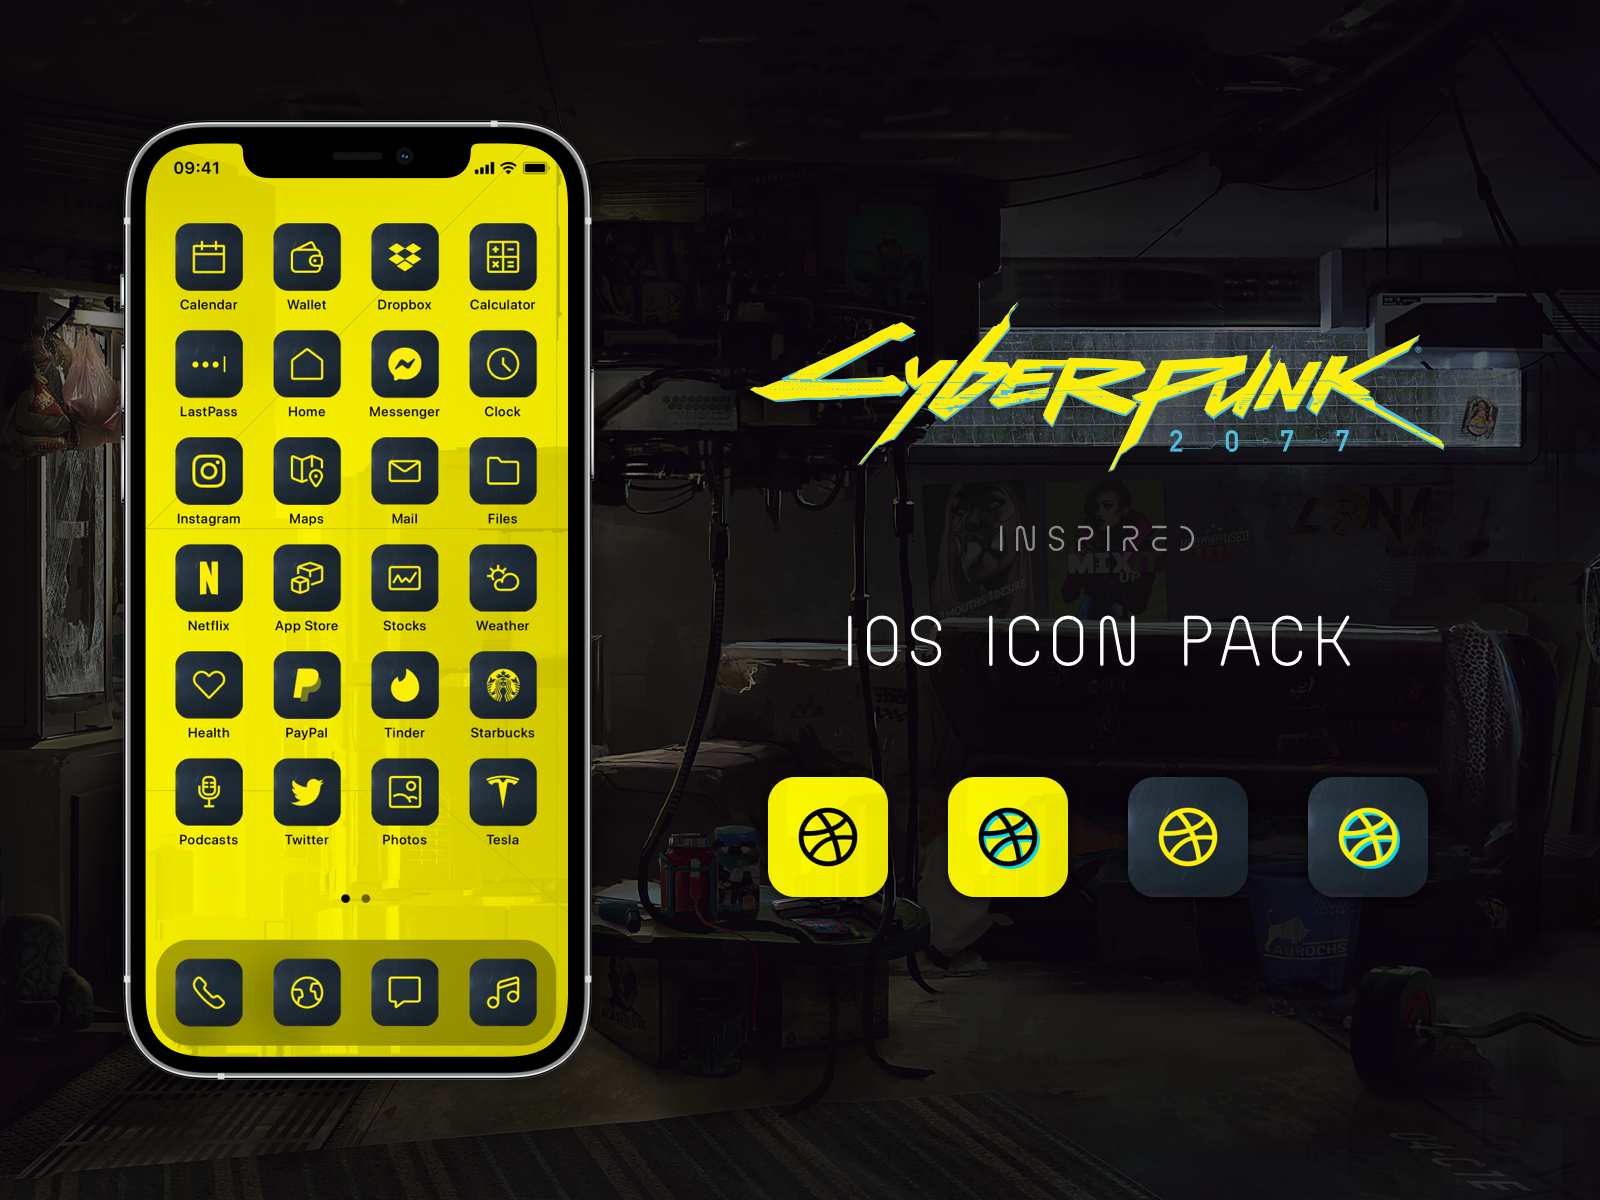 Cyberpunk 2077 inspired icon pack for iOS by BHPX on Dribbble